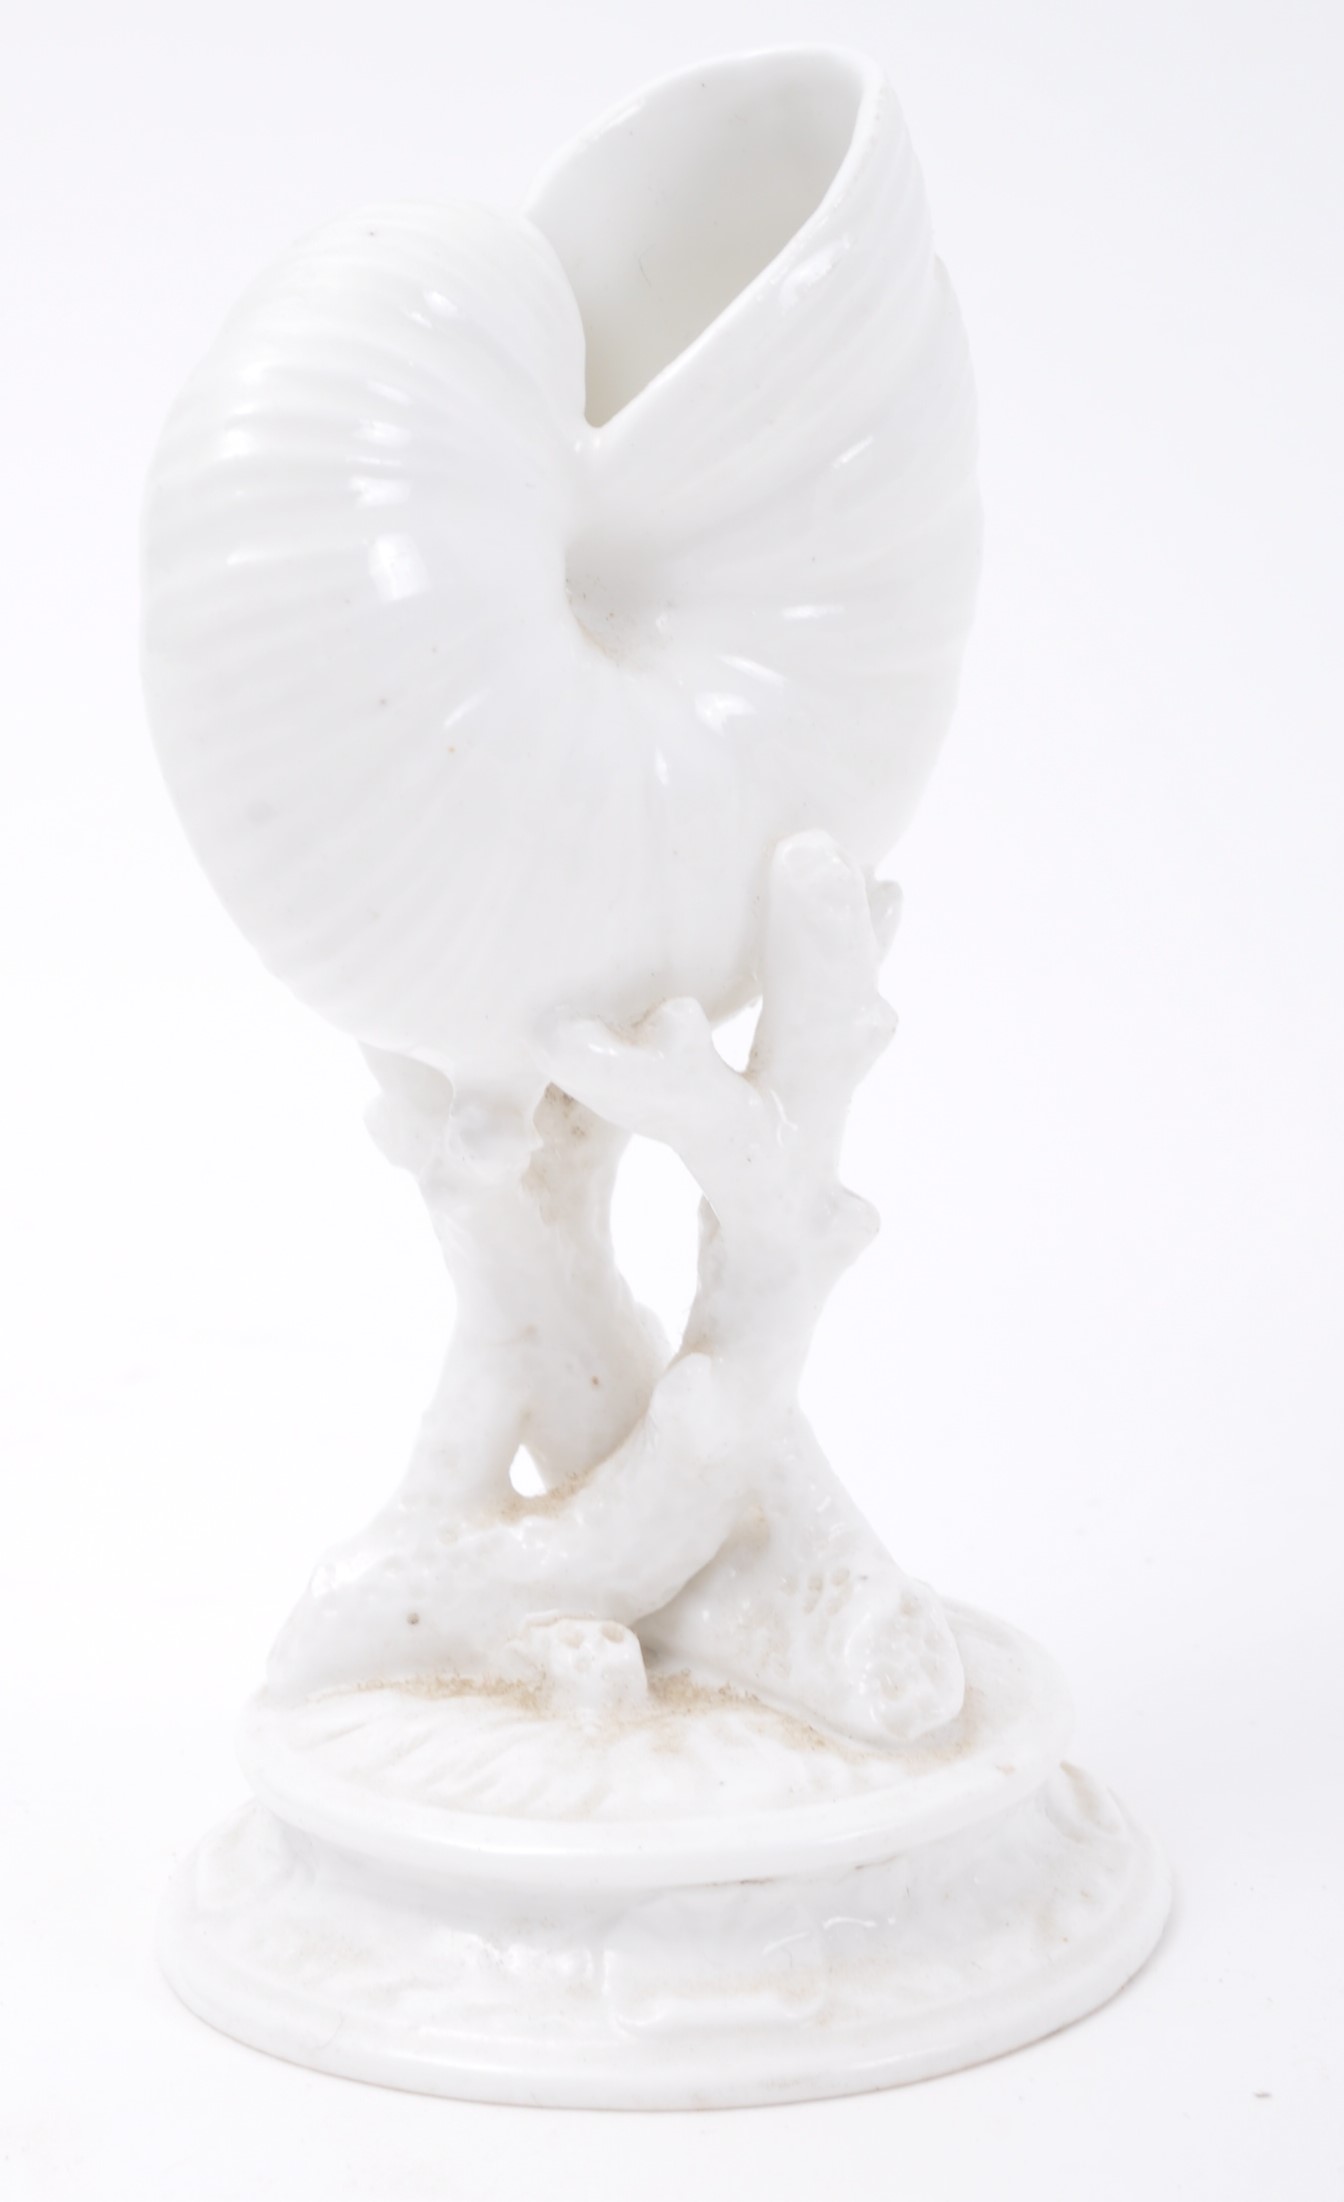 THREE LATE 19TH CENTURY WHITE PORCELAIN SHELL DISPLAYS - Image 5 of 8